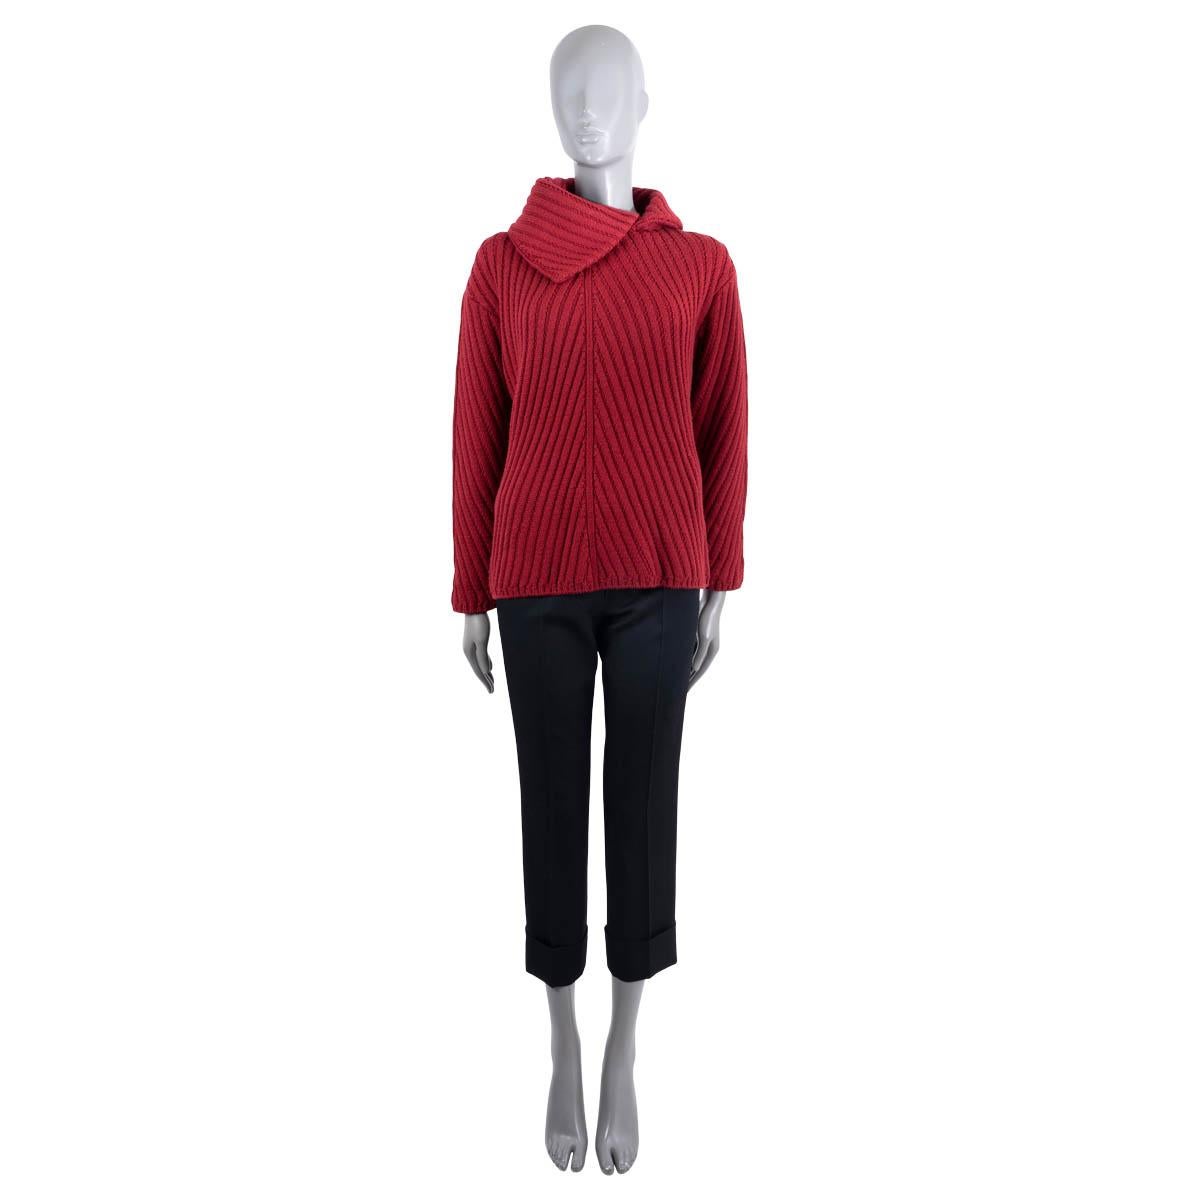 100% authentic Hermès rib-knit sweater in dark red wool (100%). Features an asymmetric fold-over collar and diagonal rib-knit pattern. Unlined. Has been worn and is in excellent condition. 

2019 Pre-Fall

Measurements
Tag Size	36
Size	XS
Shoulder